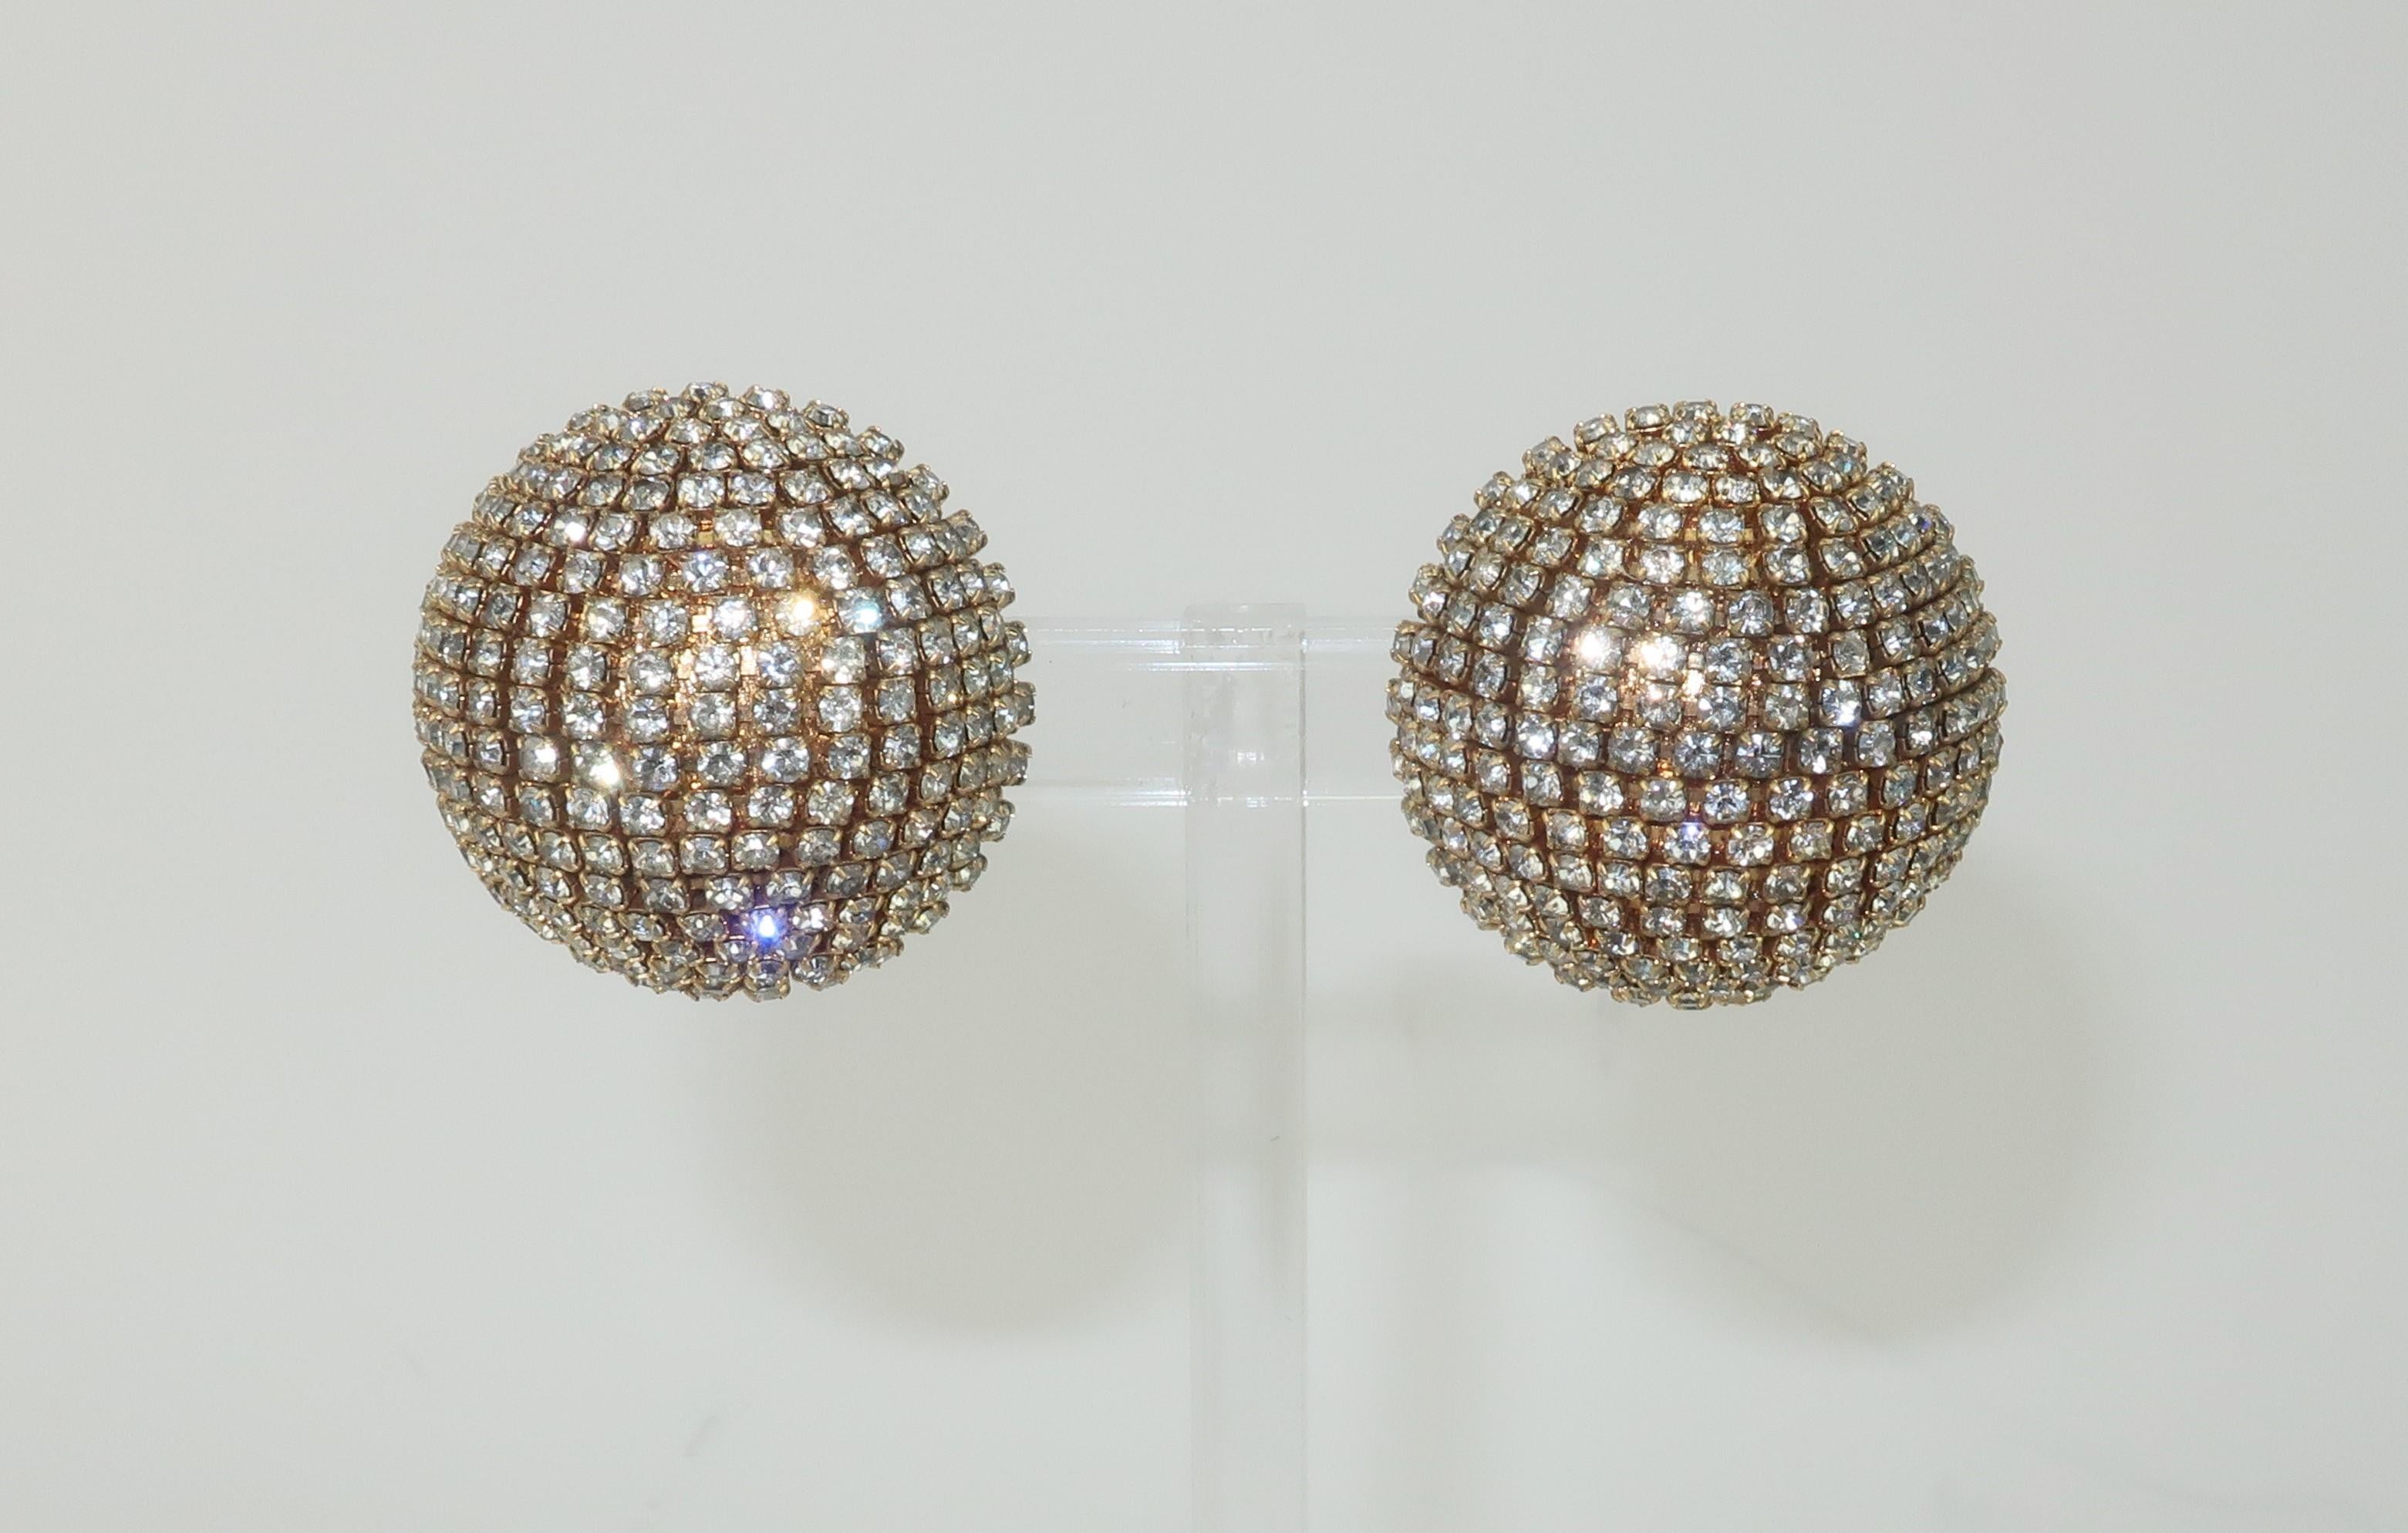 Spectacular sparkles!  C.1980 gold tone metal earrings fully embellished with sparkling crystal rhinestones.  The half dome silhouette is backed by clip on hardware.  A simple design and yet an ultra glamorous look.  Unsigned though well made with